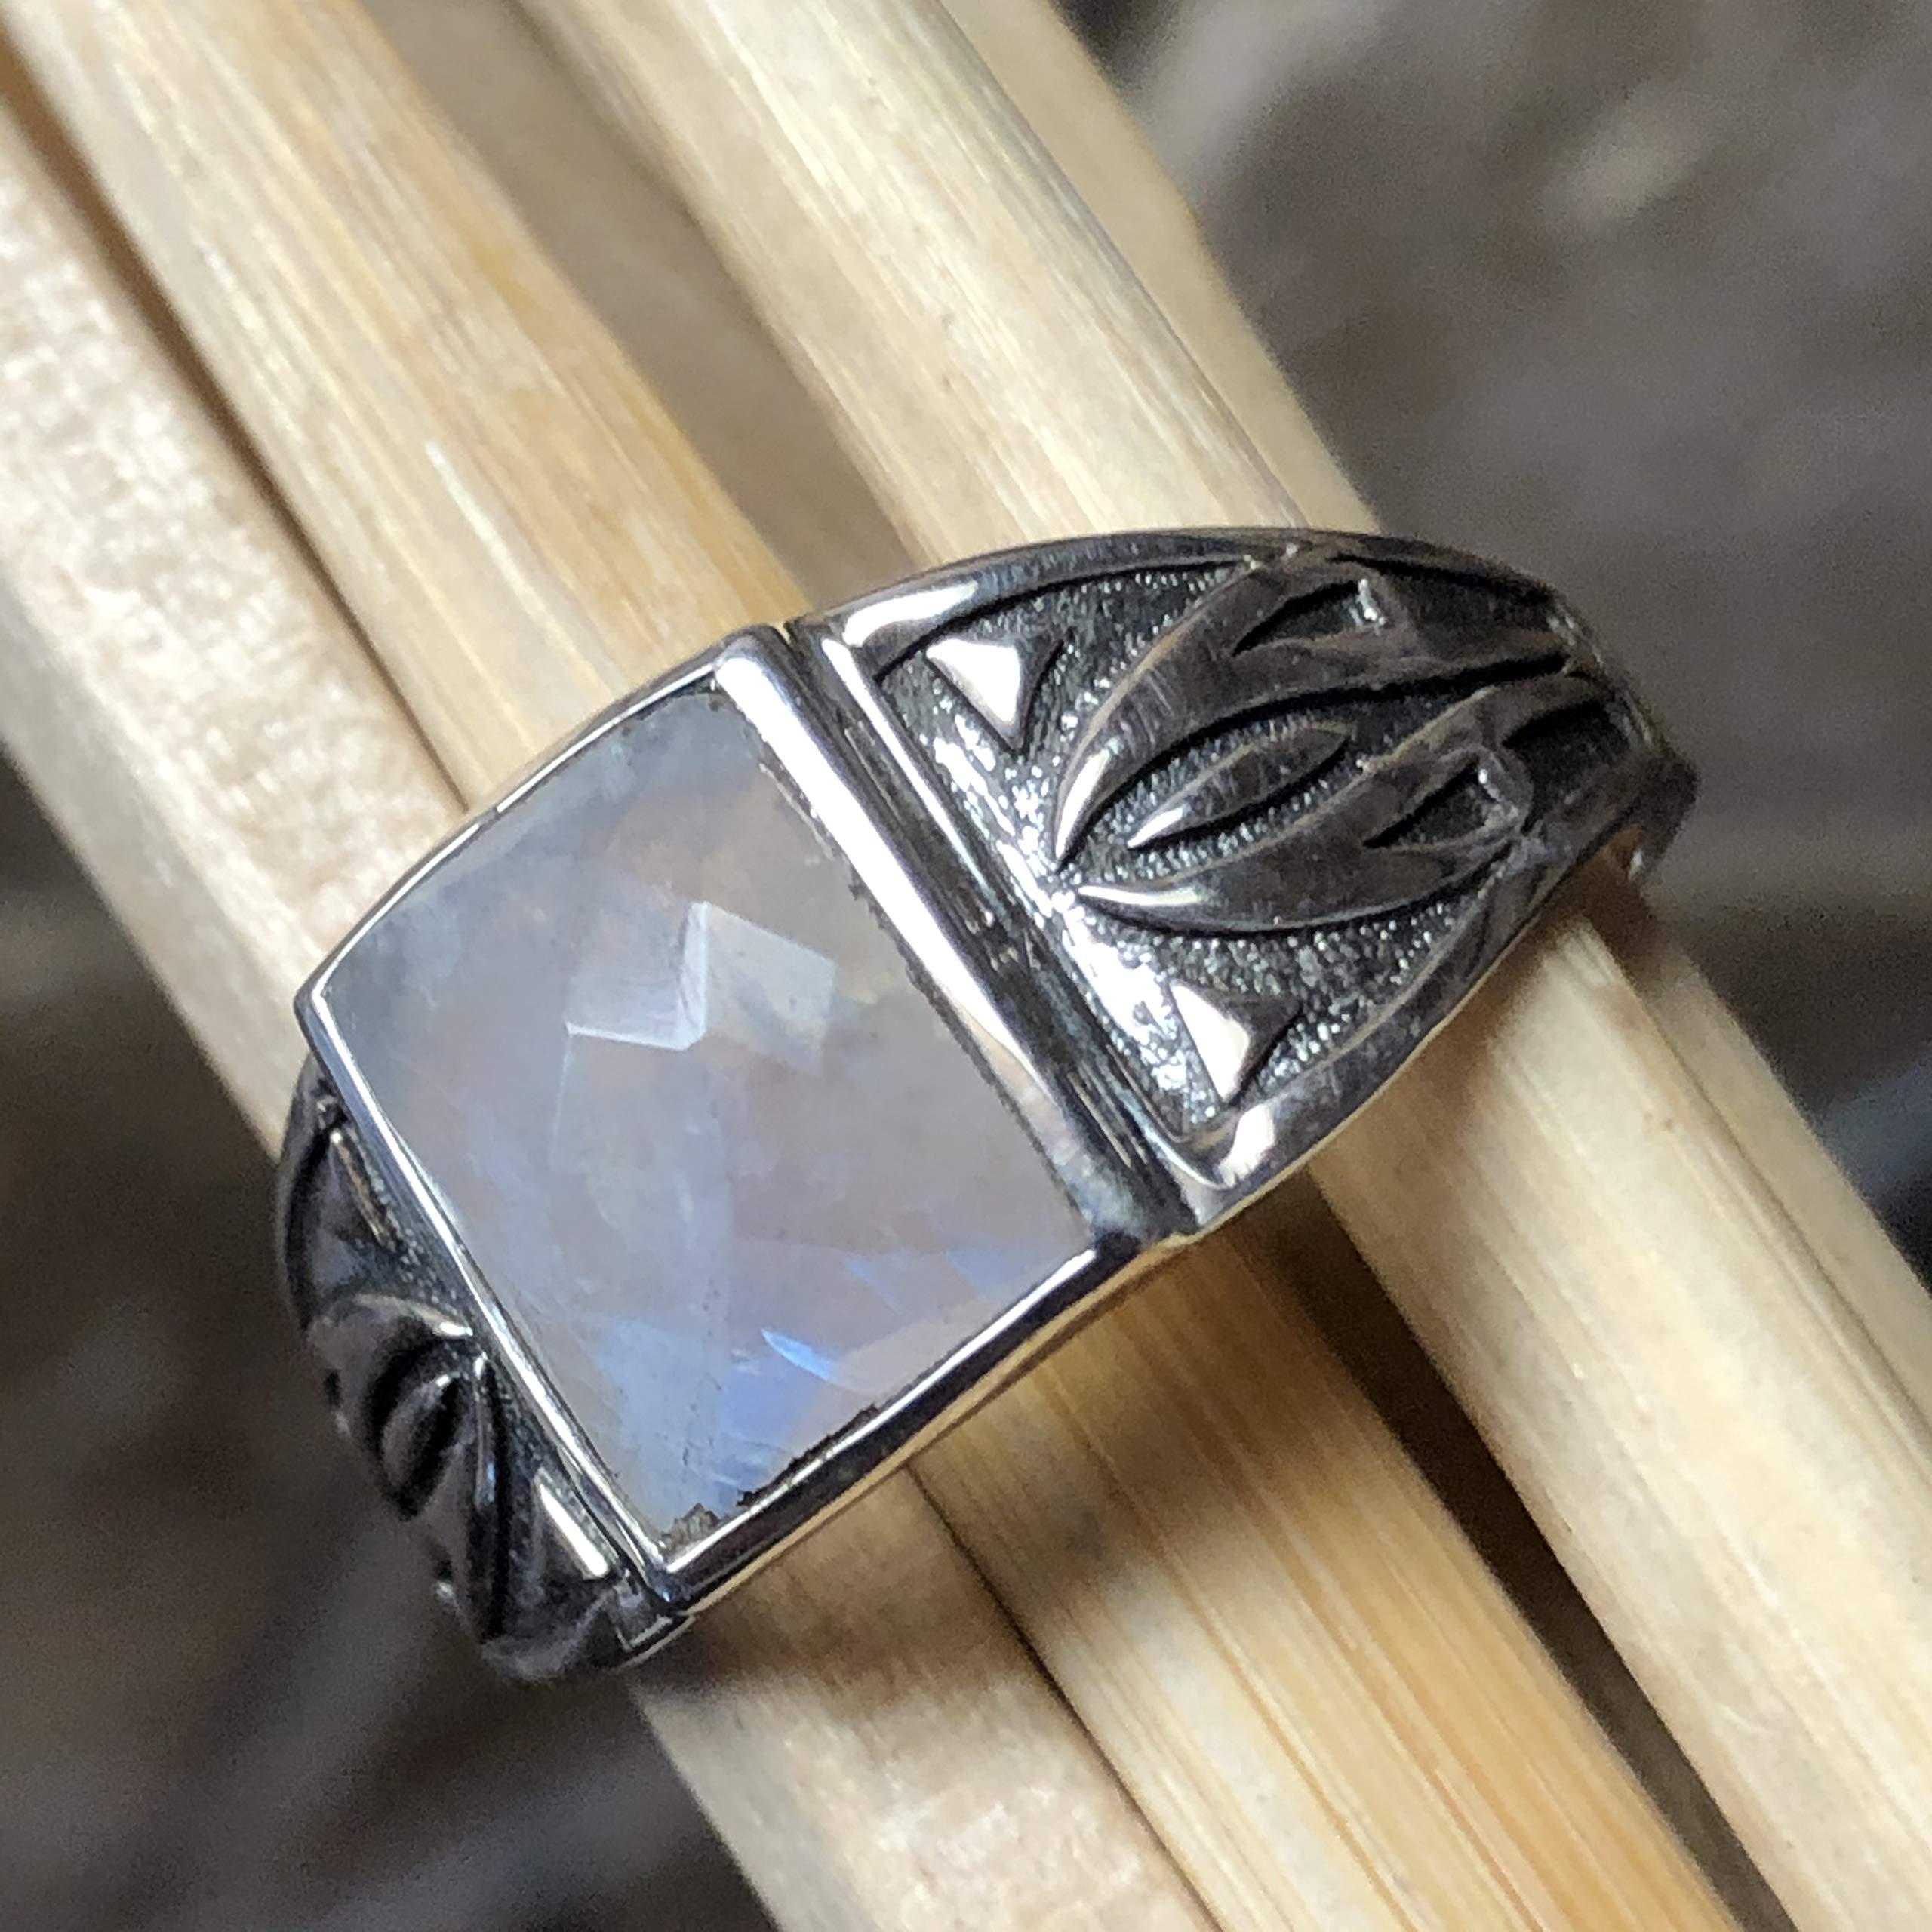 Natural Rainbow Moonstone 925 Solid Sterling Silver Men's Ring Size 7, 8, 9, 10, 11, 12 - Natural Rocks by Kala